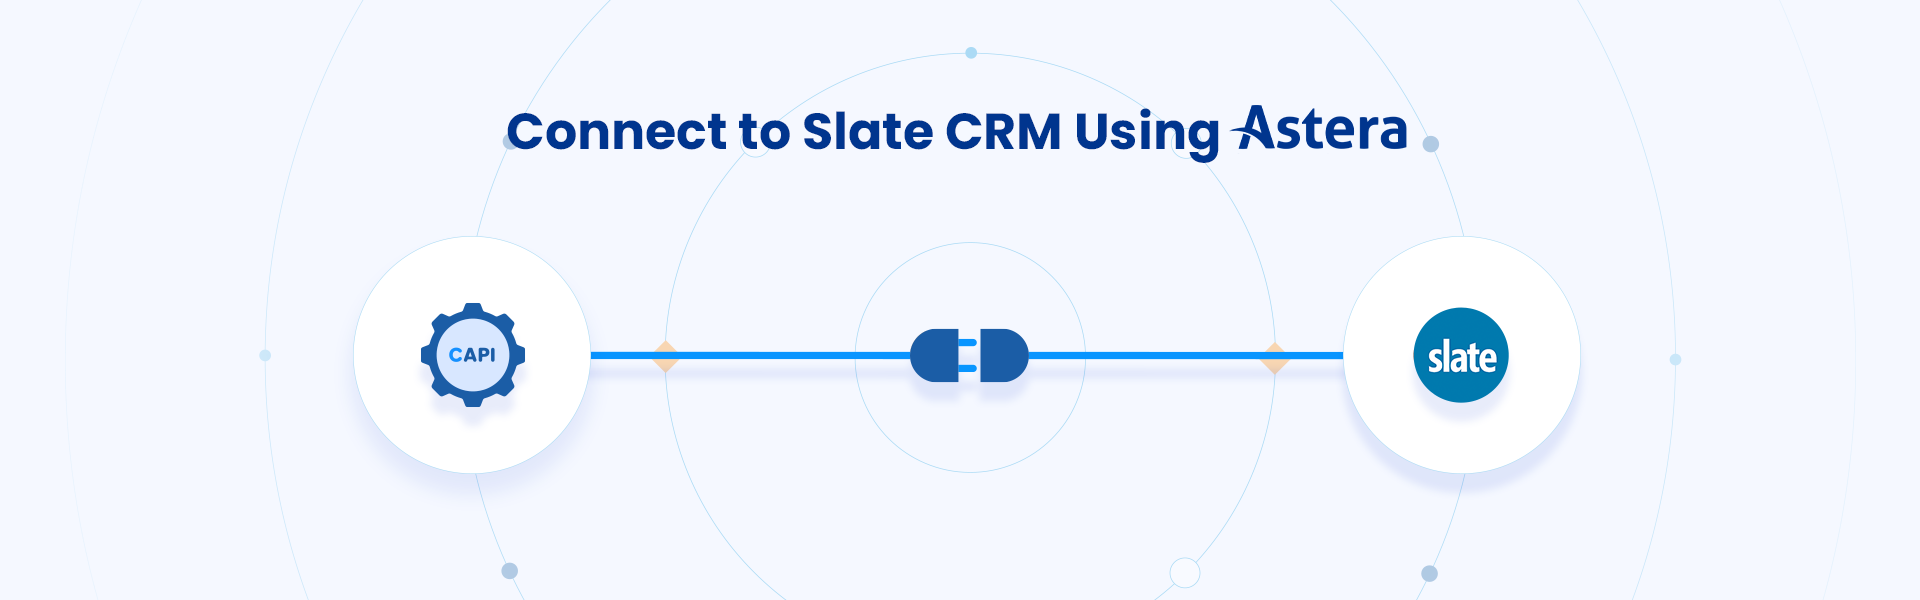 Connect to Slate CRM with Astera